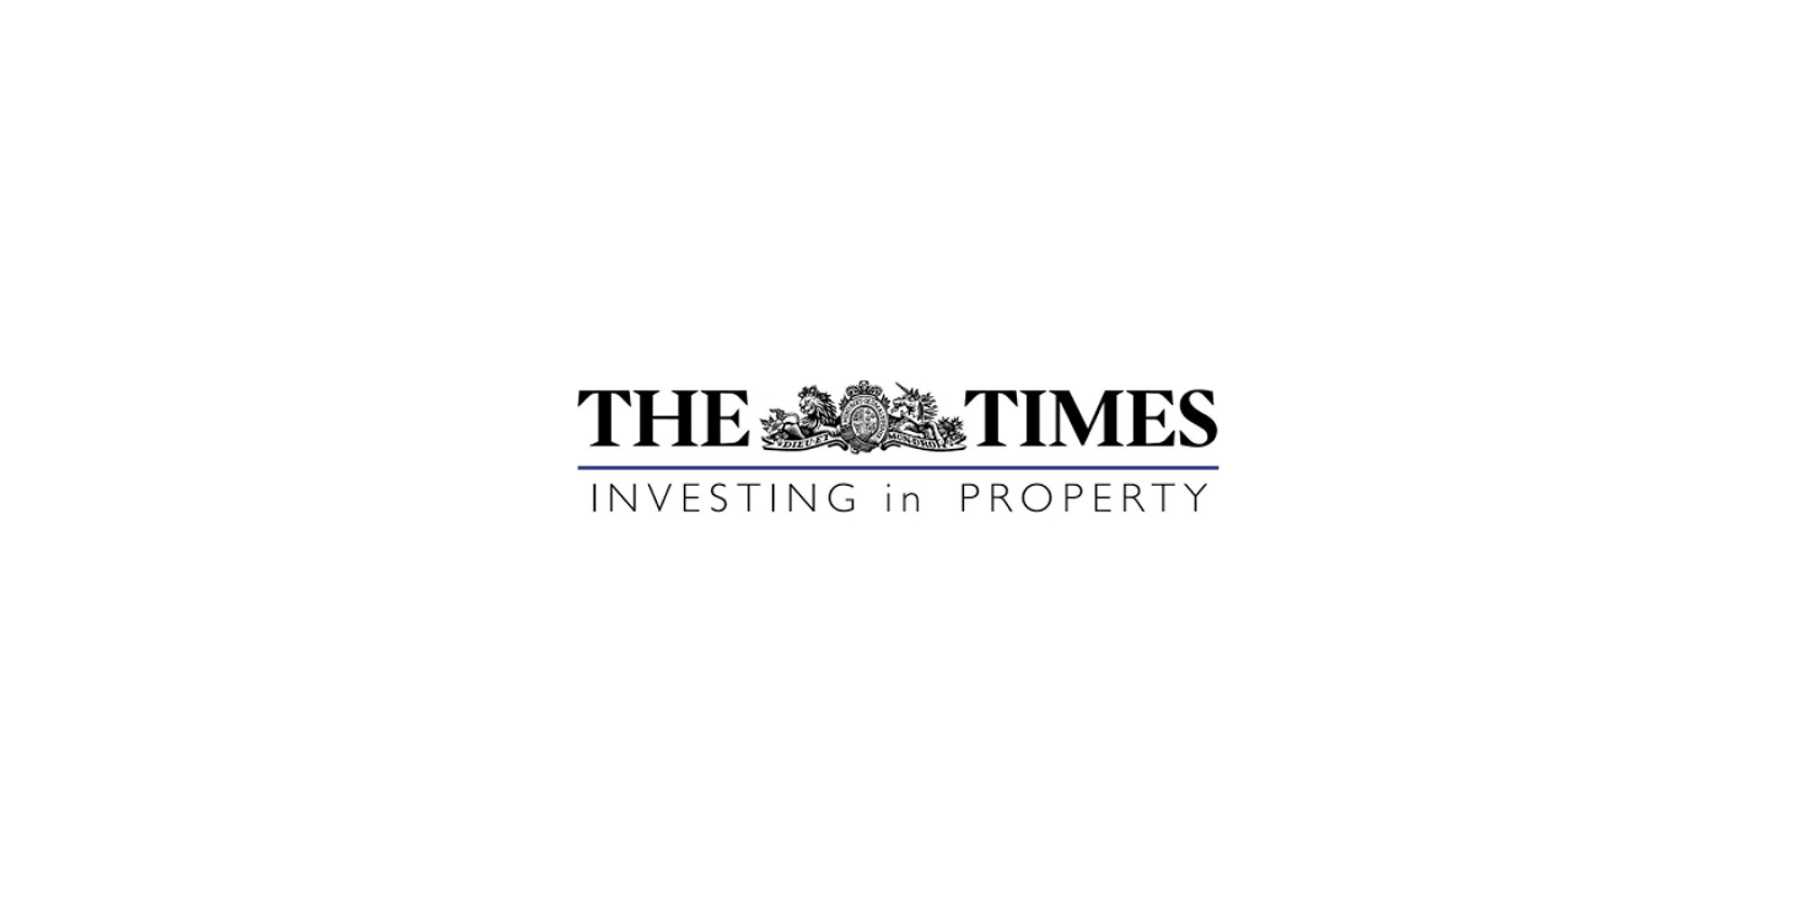 The Times – Investing in Property coverage of One United Properties business prospects